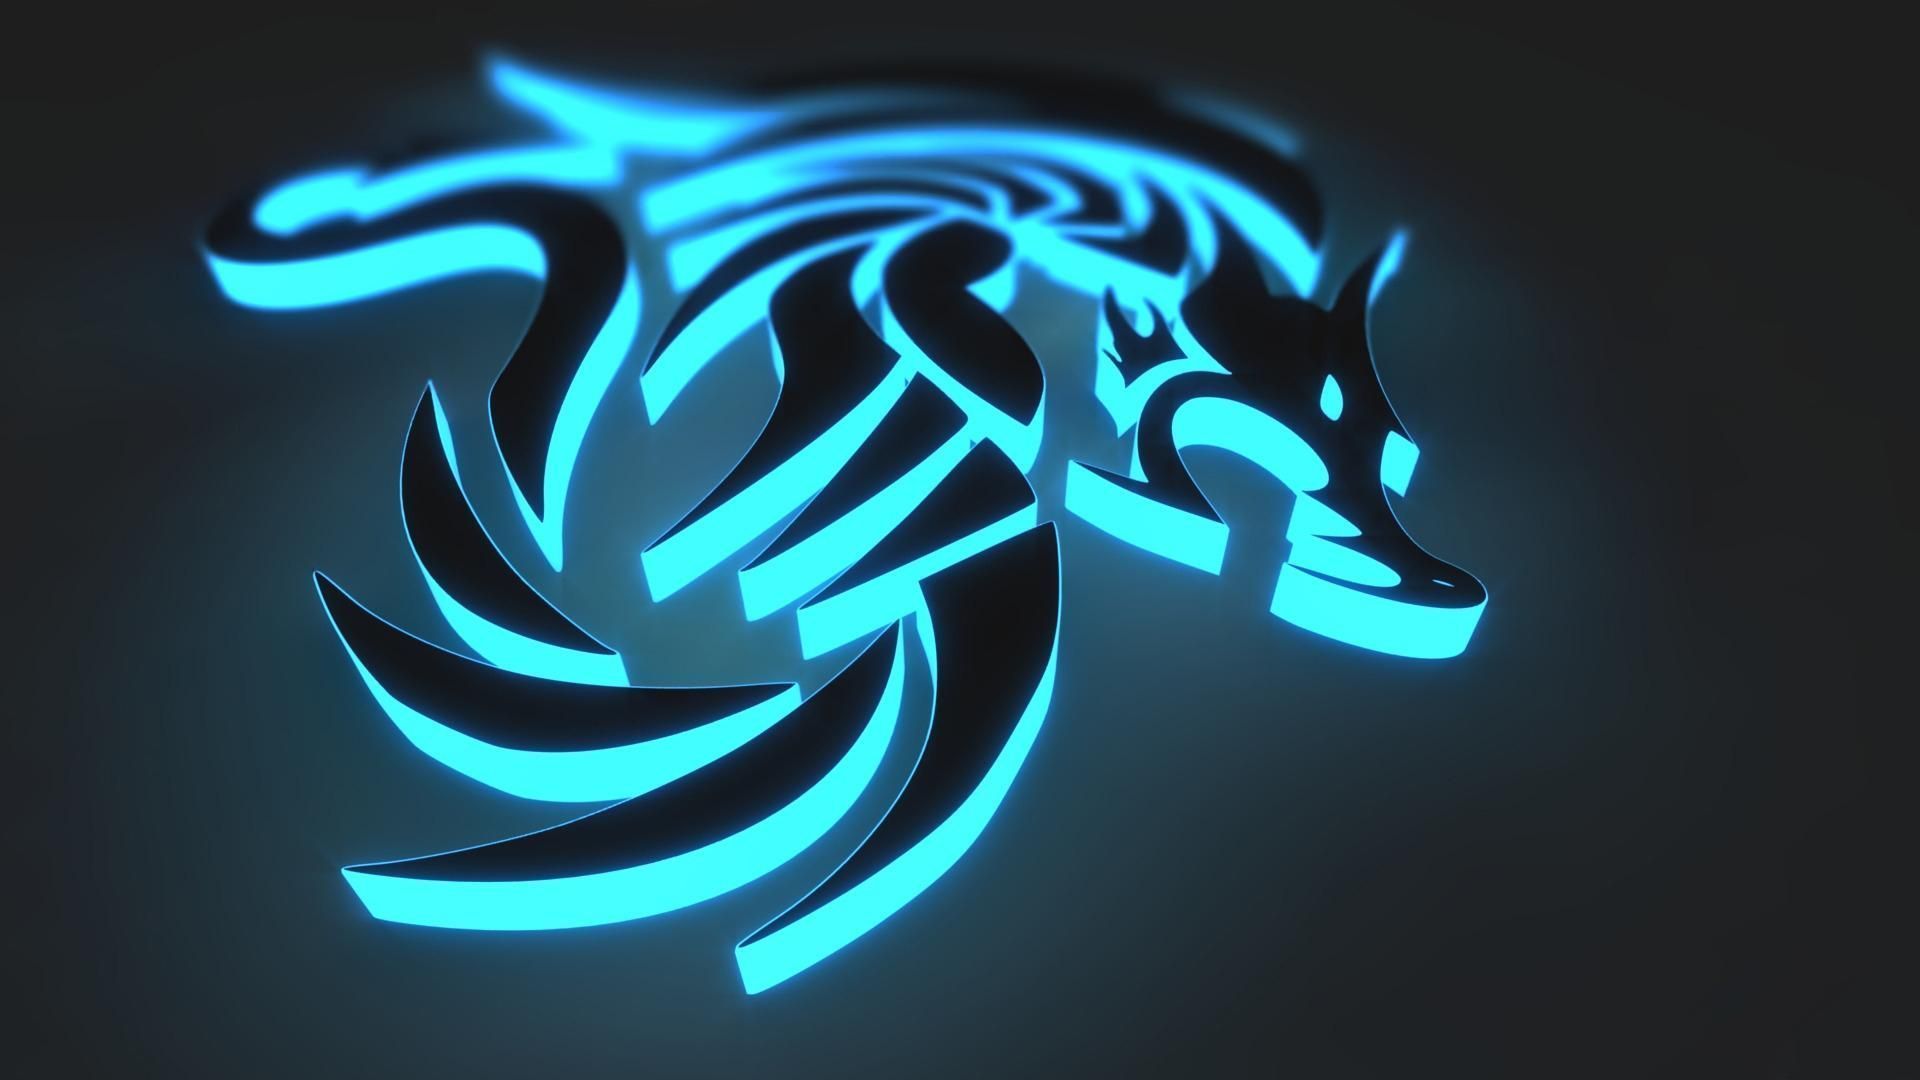 Blue Dragon Wallpaper Background Images | HD Wallpapers Range